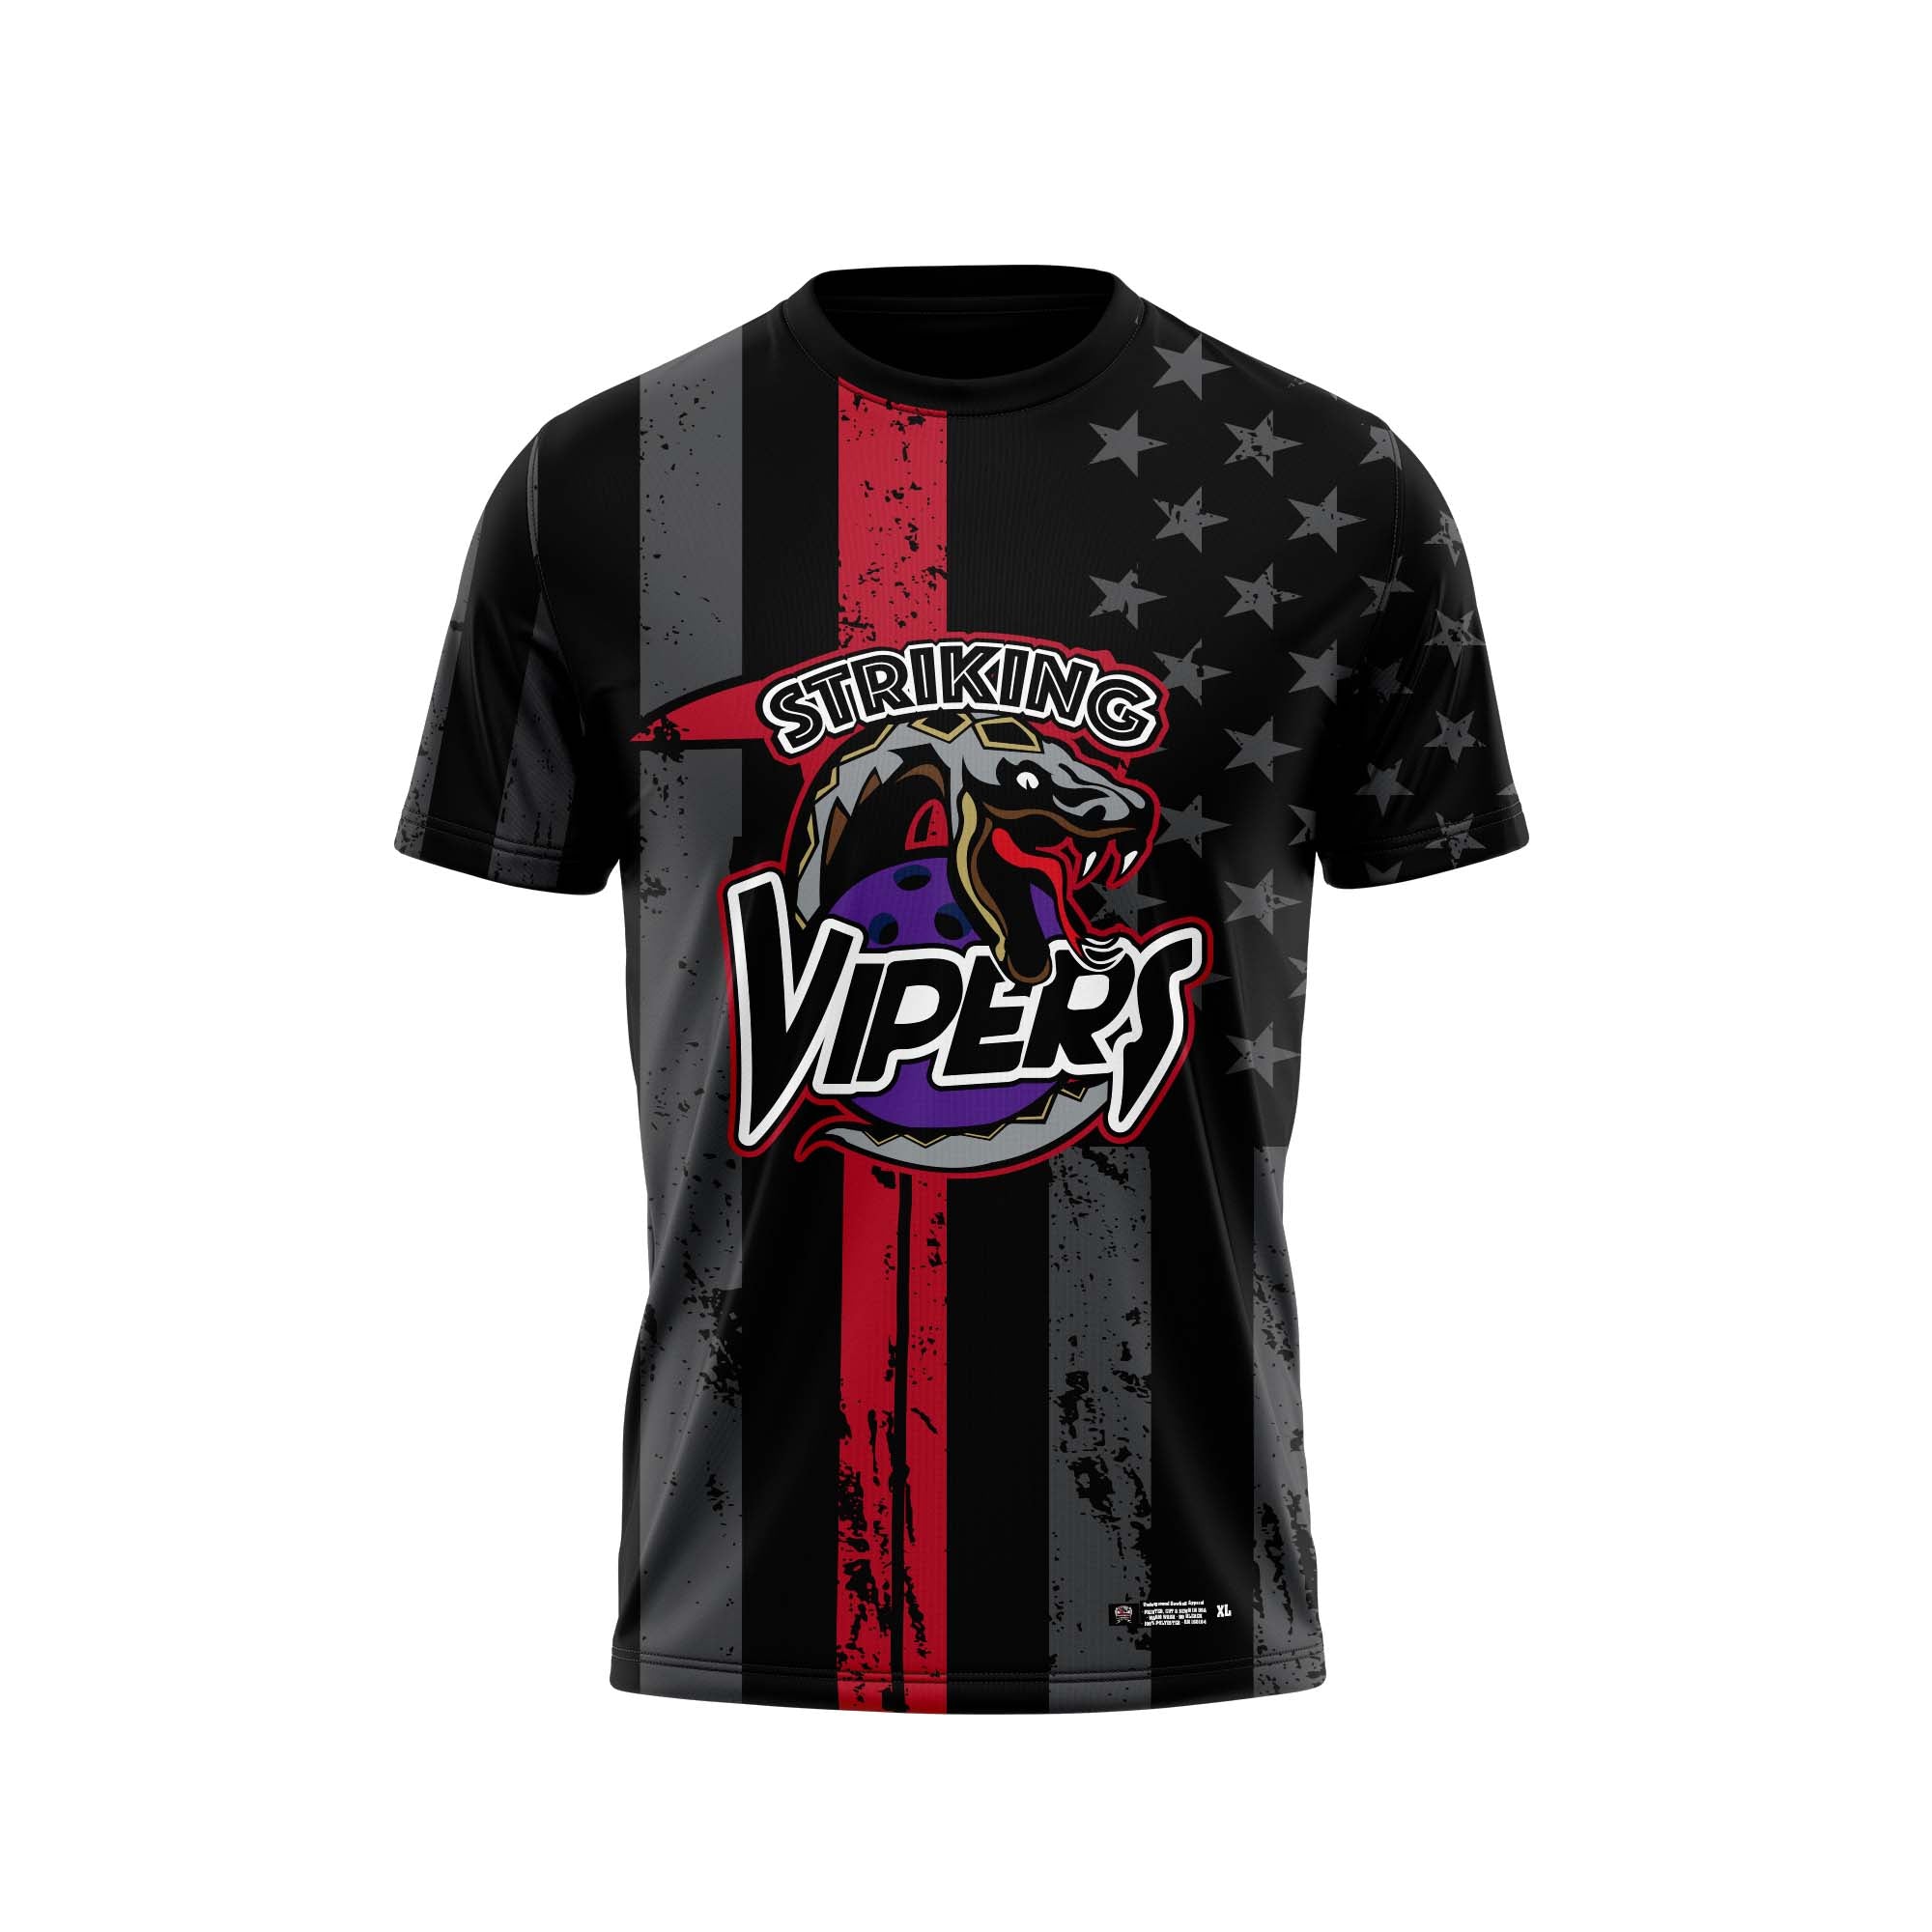 Striking Vipers Black / Red Jersey